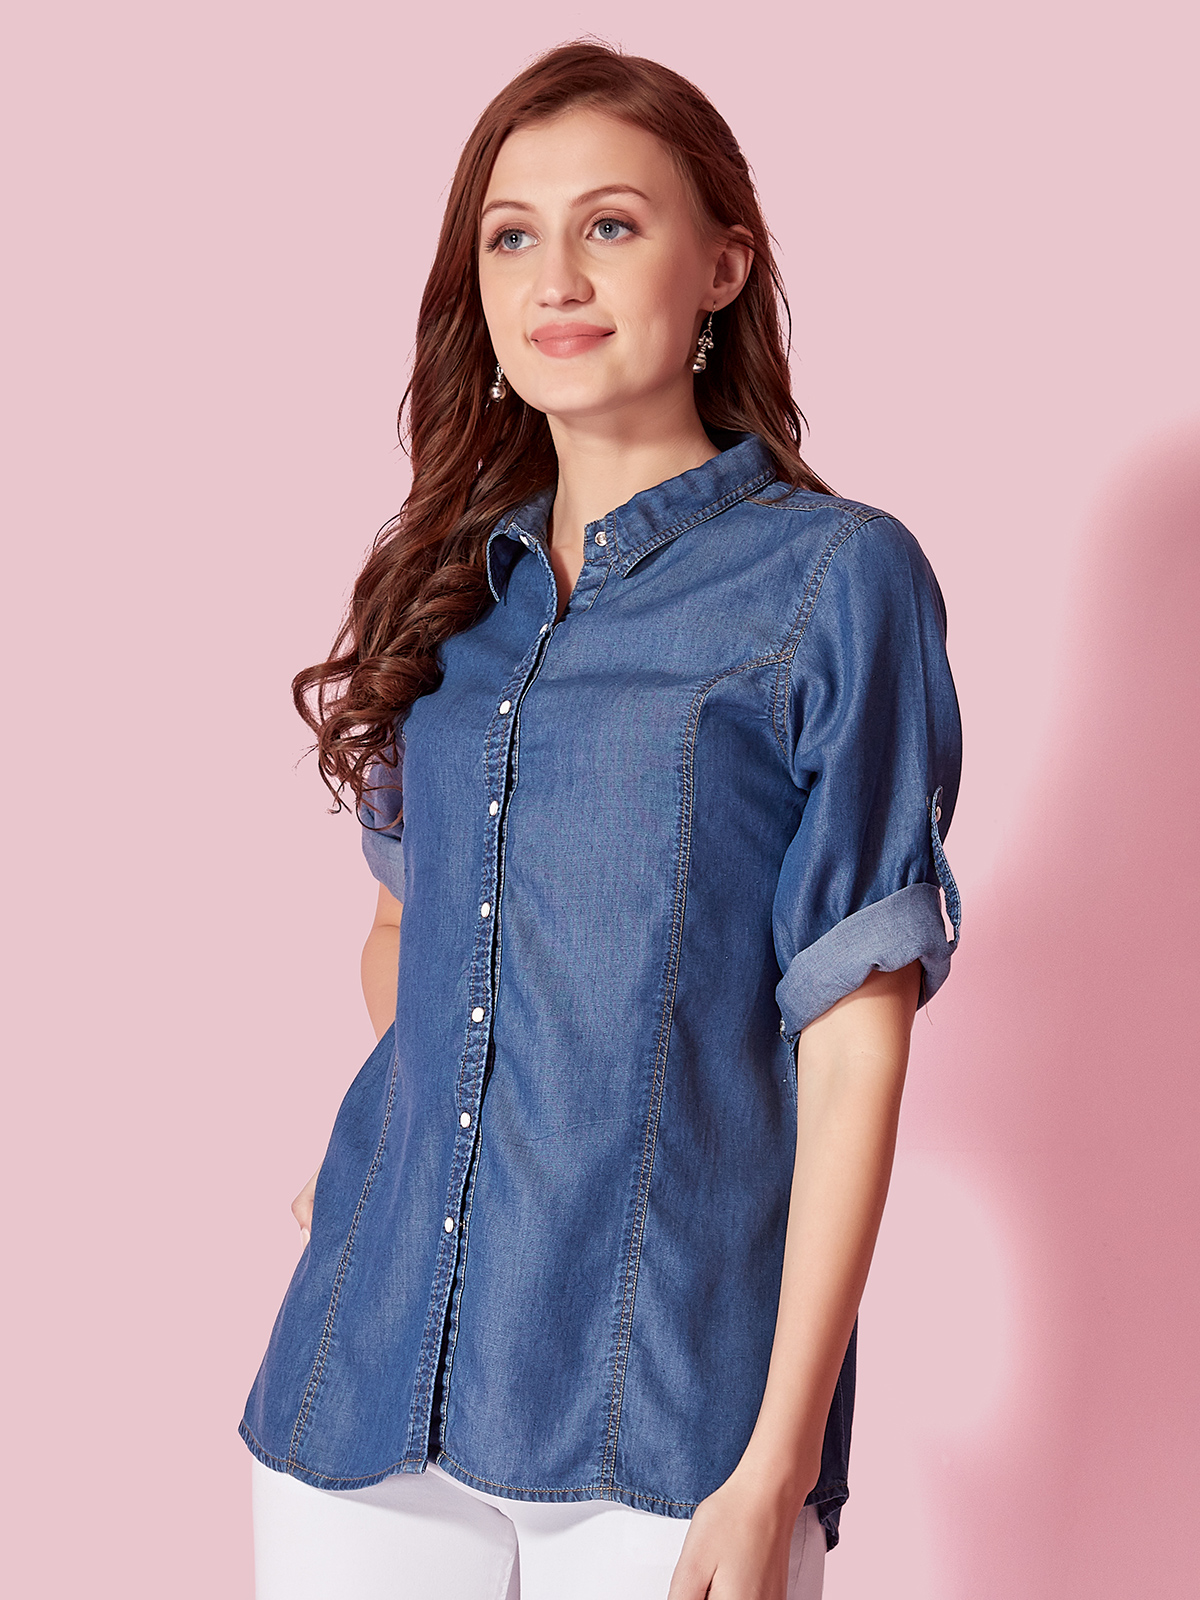 Blue Solid Casual Shirt | Mens shirts, Casual shirts, Gas jeans